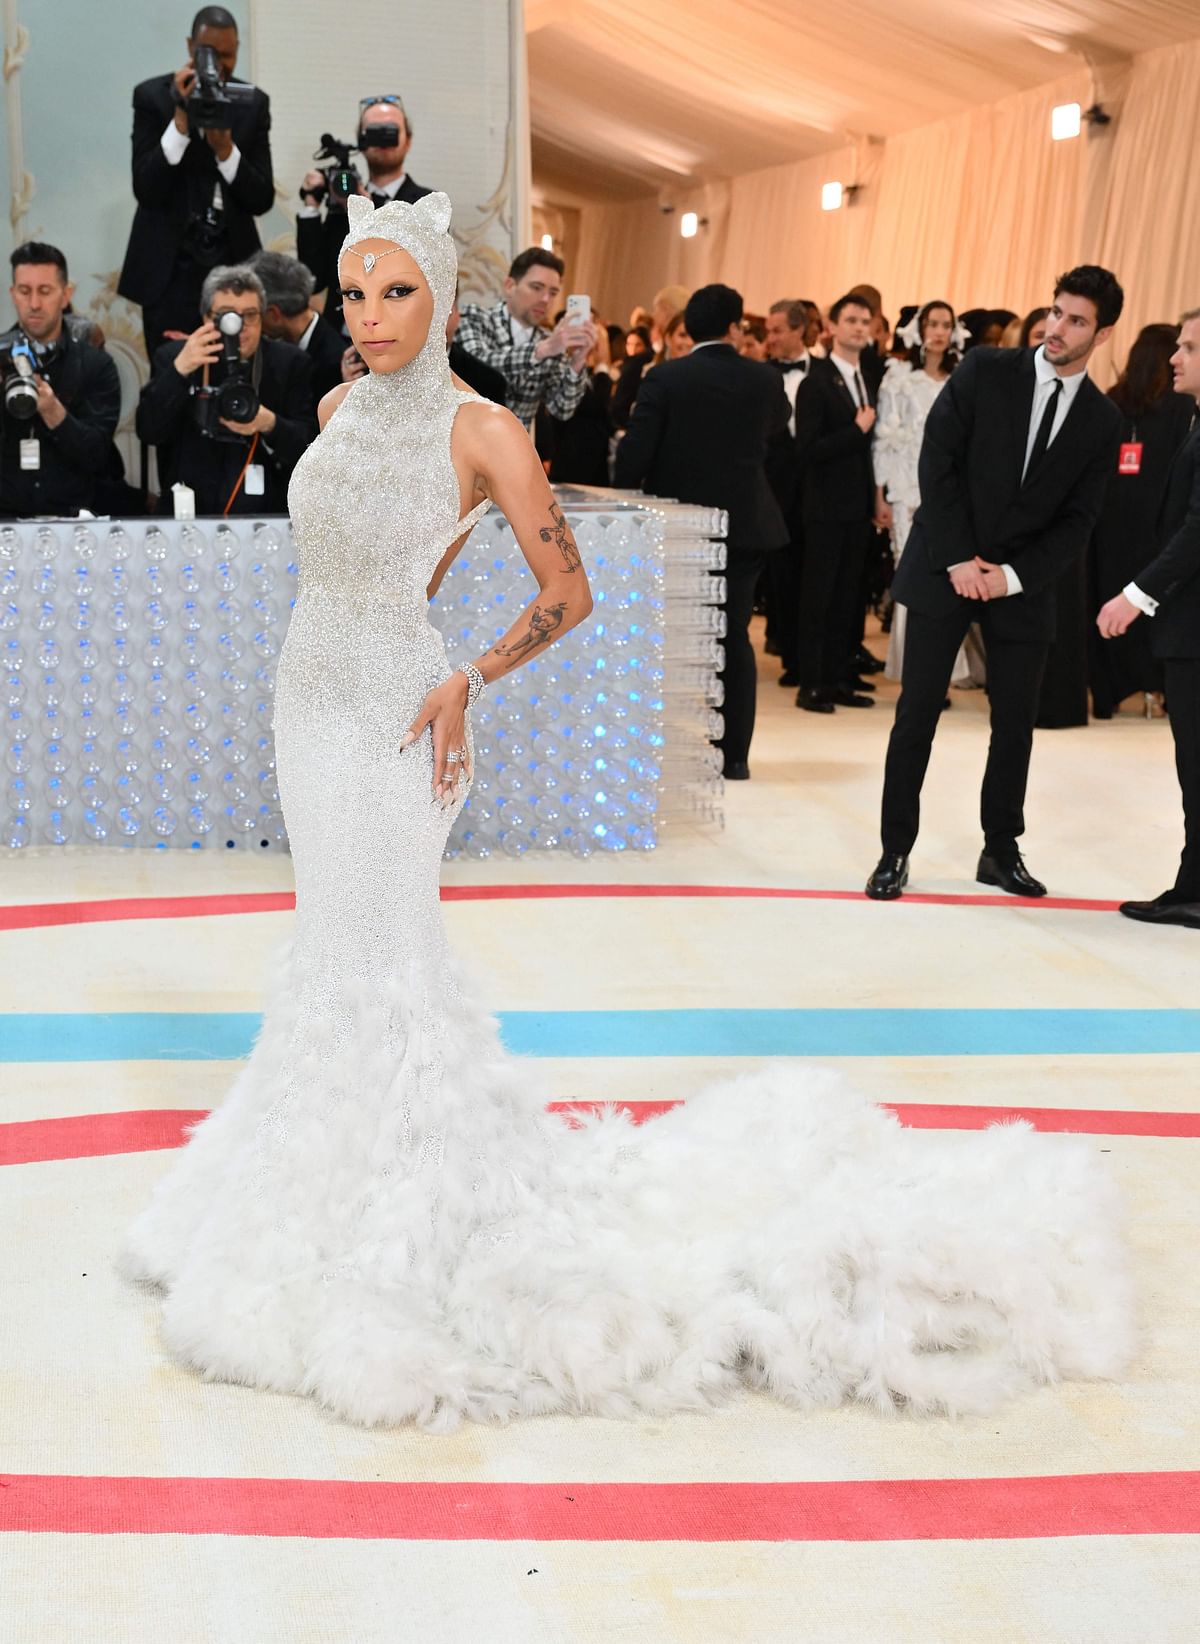 US rapper Doja Cat arrives for the 2023 Met Gala at the Metropolitan Museum of Art on 1st May, 2023, in New York. The Gala raises money for the Metropolitan Museum of Art's Costume Institute. The Gala's 2023 theme is “Karl Lagerfeld: A Line of Beauty.”